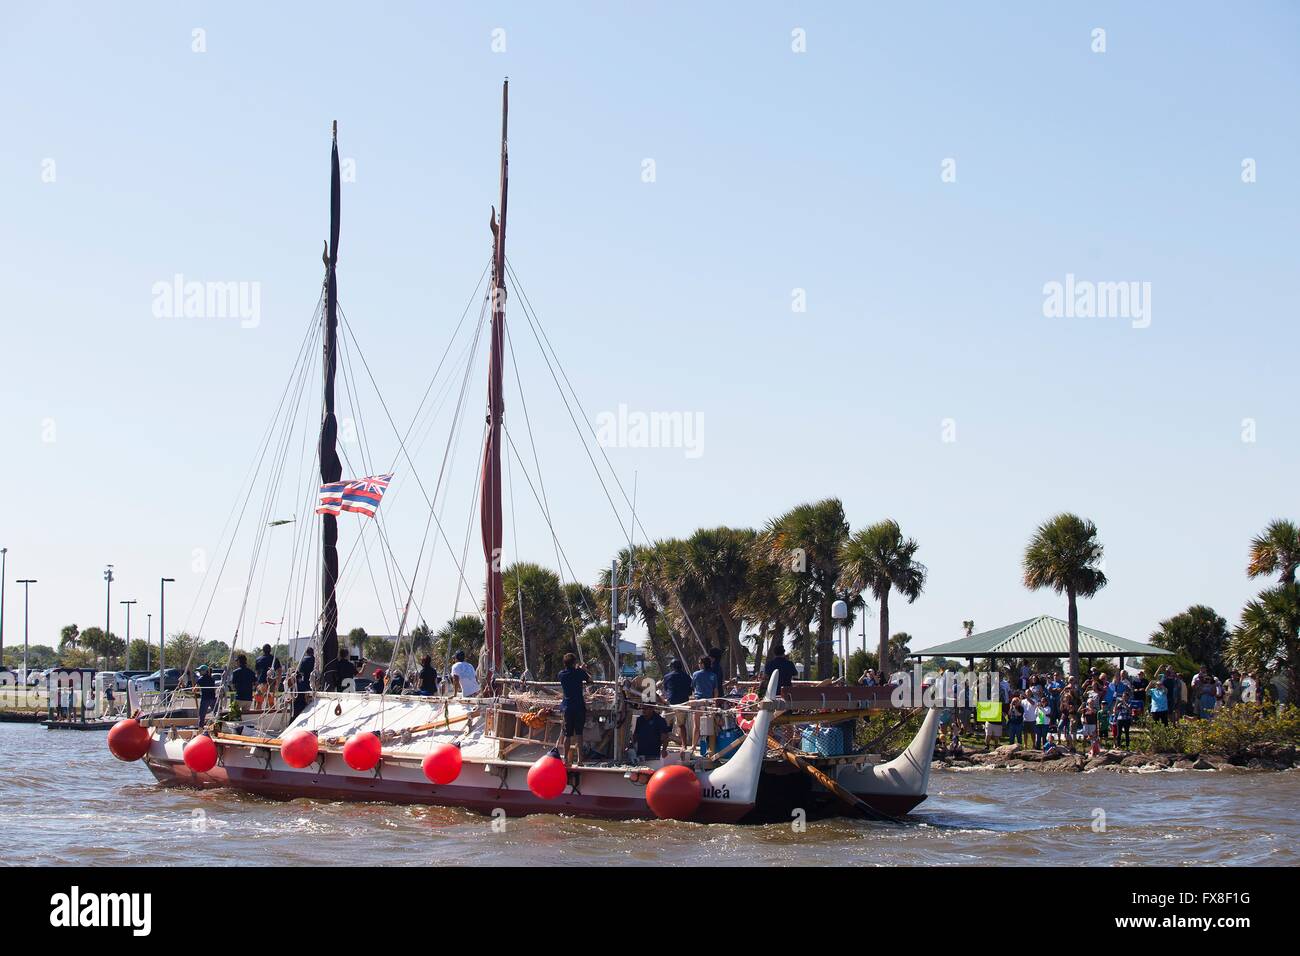 The Polynesian traditional voyaging canoe Hokulea sails the Indian River before stoping to honor Hawaiian astronauts near the Kennedy Space Center April 5, 2016 in Titusville, Florida. The traditionally designed, ocean-going Hawaiian canoe is sailing around the world demonstrating ancient navigation techniques and to raise awareness of climate change. Stock Photo